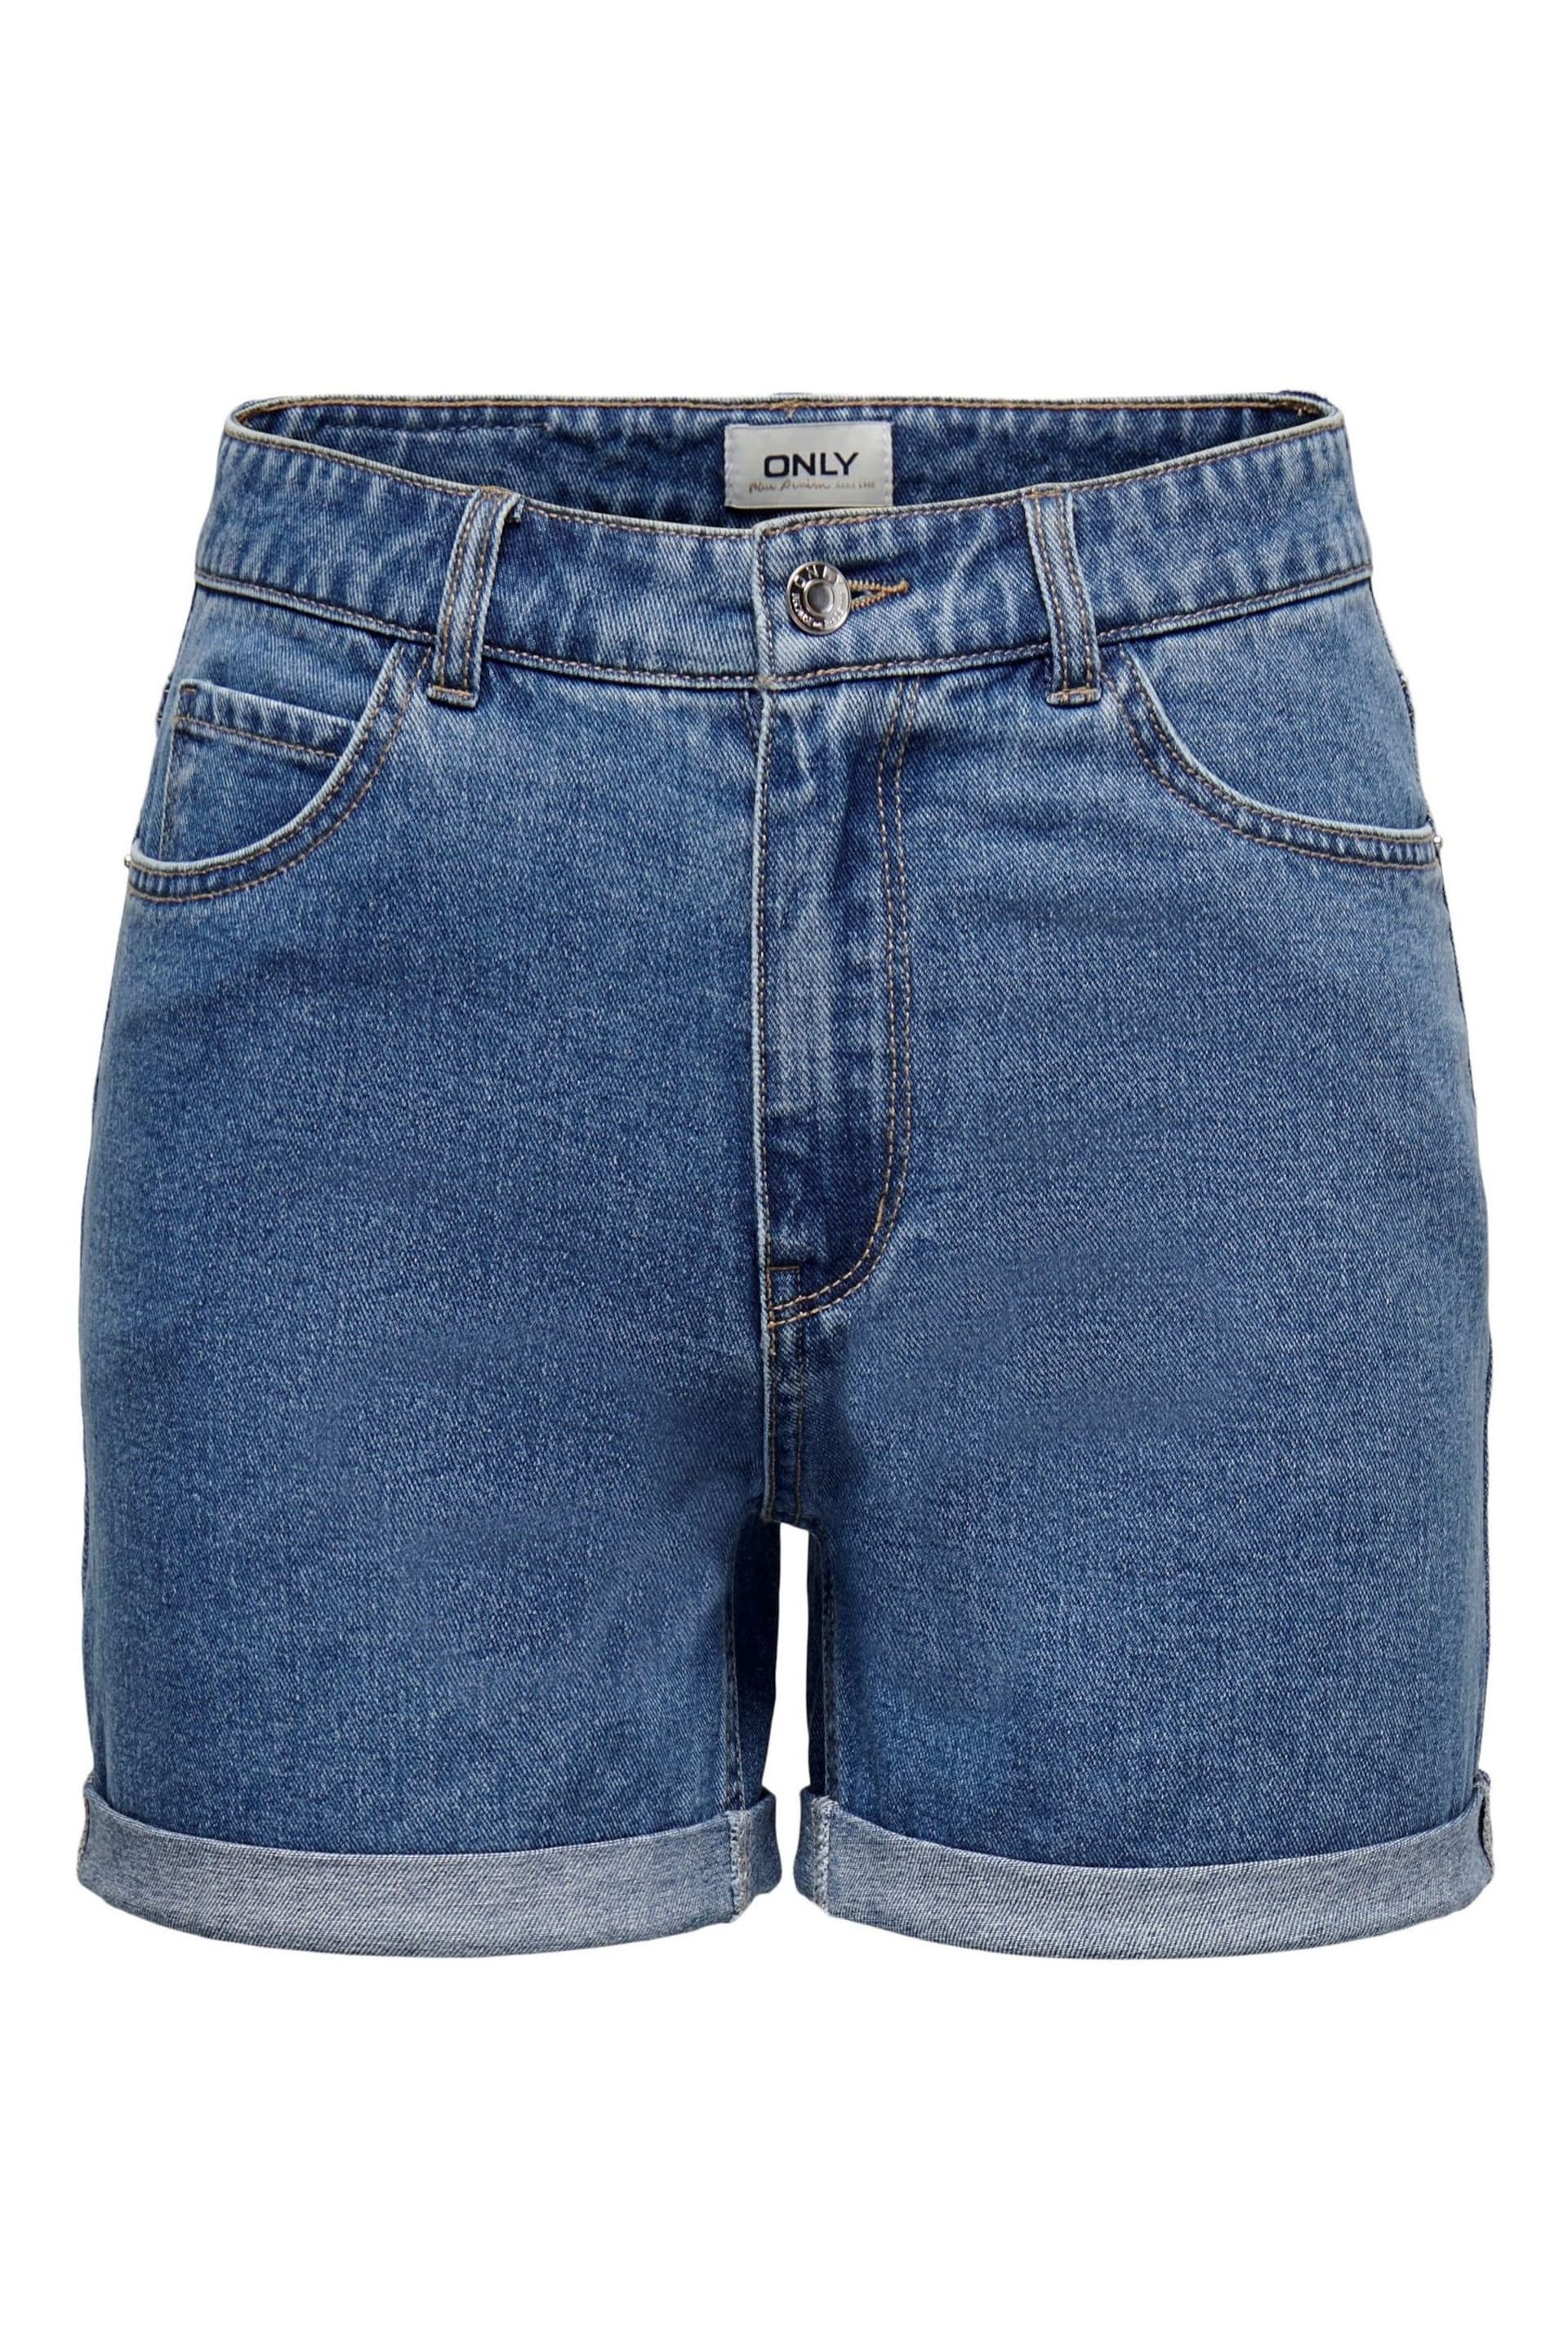 ONLY Mid Blue High Waisted Denim Mom Shorts - Image 6 of 7